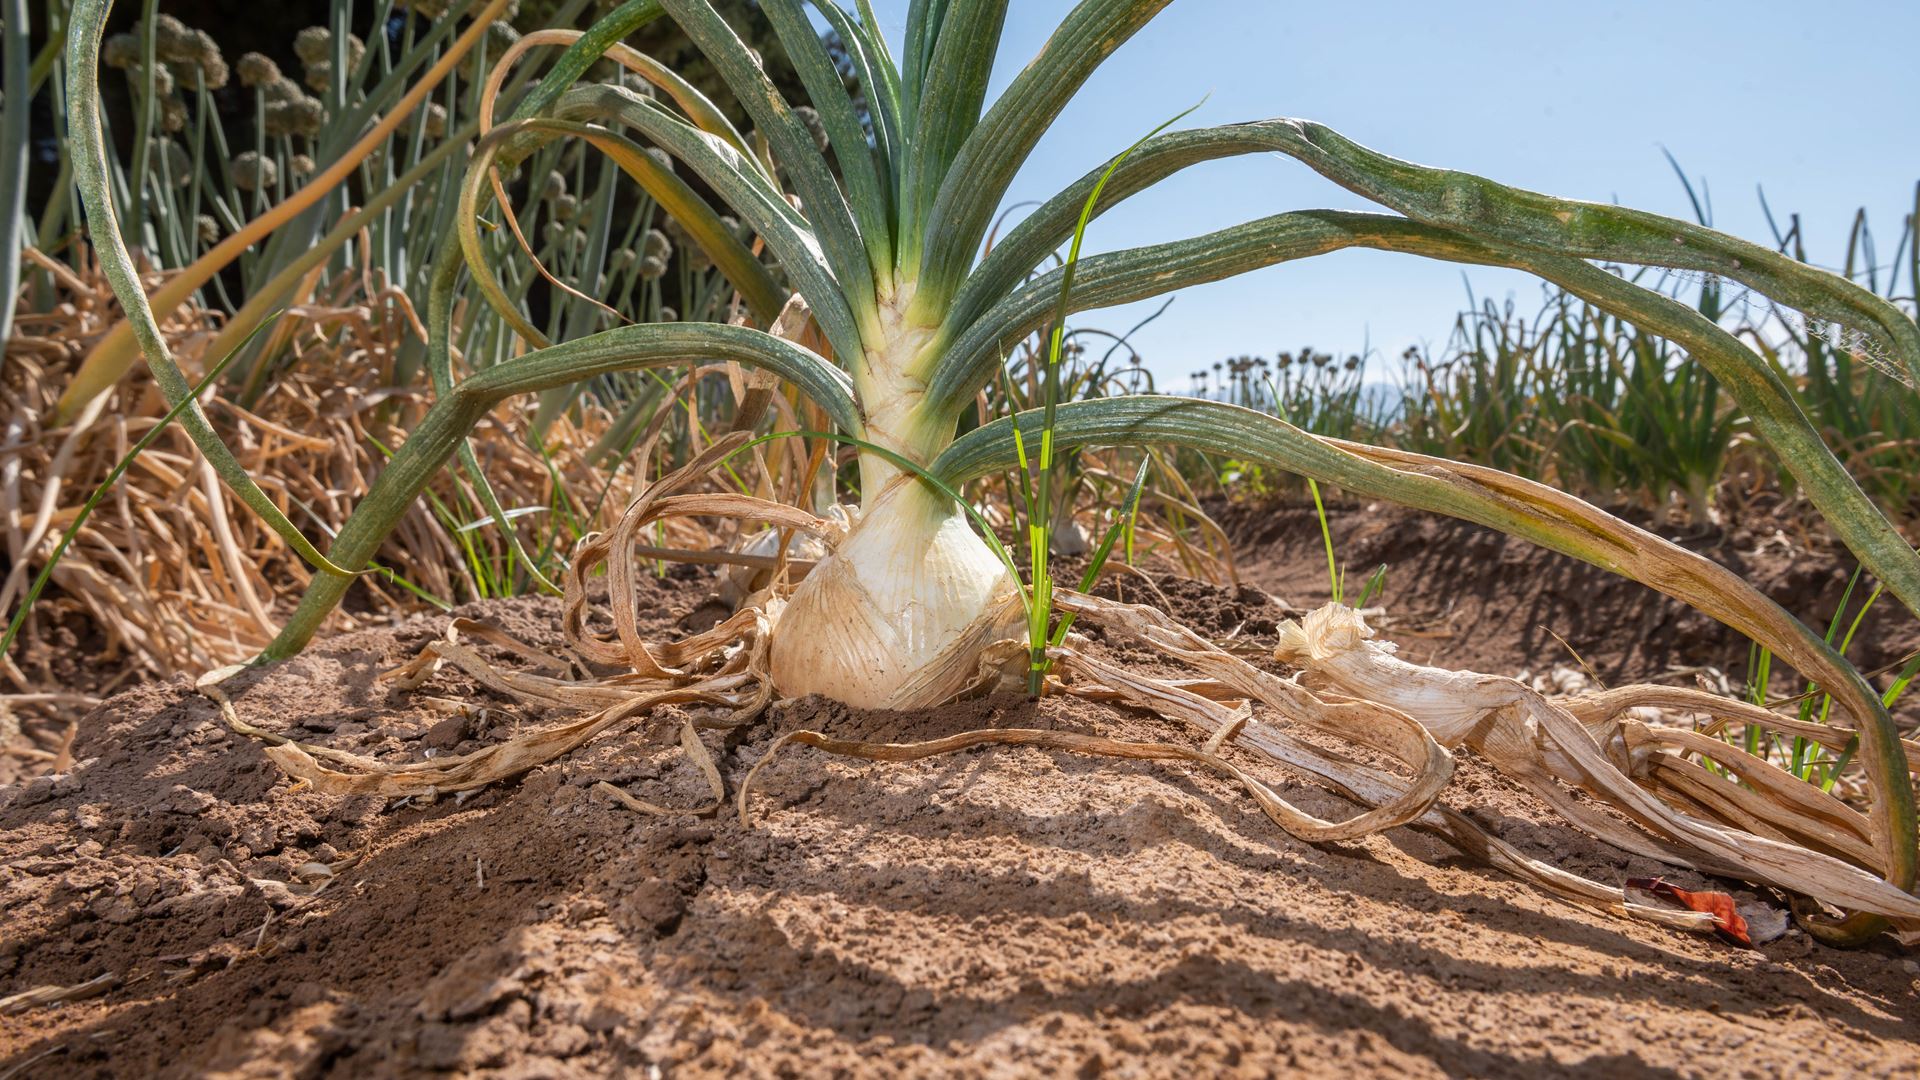 Learn all about New Mexico onions at this year’s onion field day